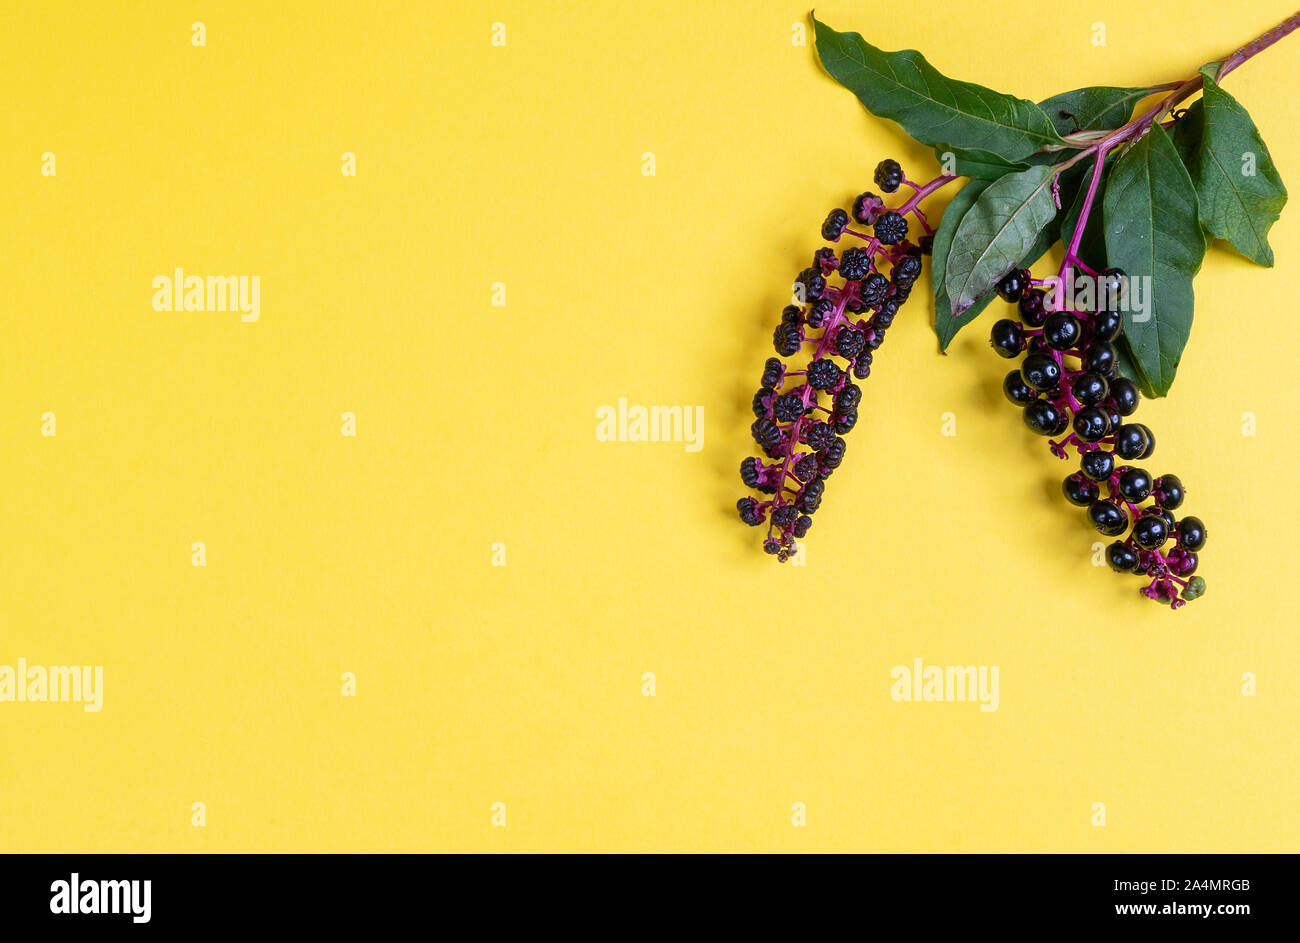 pokeweed berries in autumn on a yellow surface Stock Photo